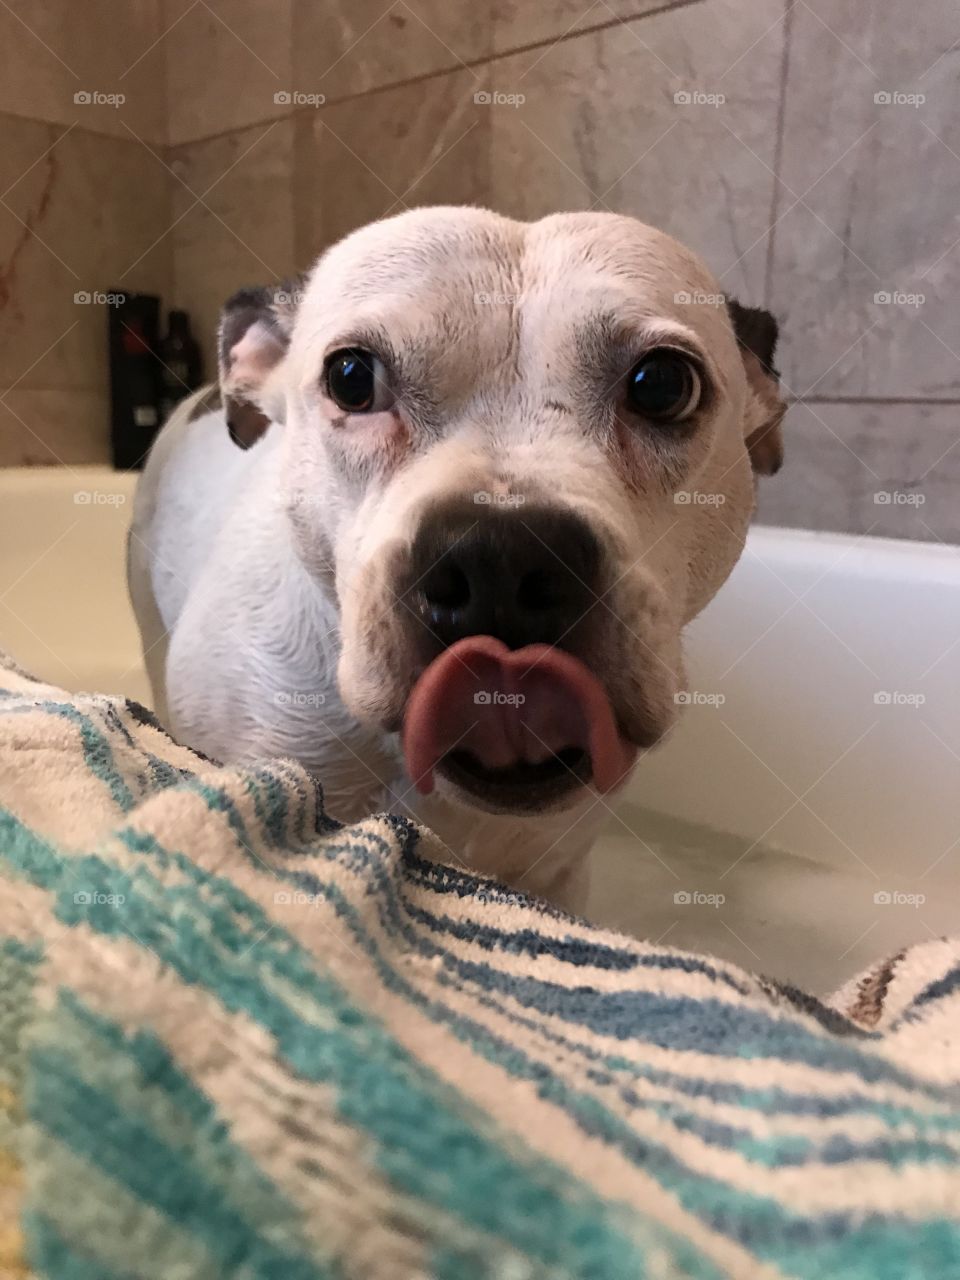 Queen Lola Belle Of the House Of Tacos receives a bath from her servant human (me 🤣